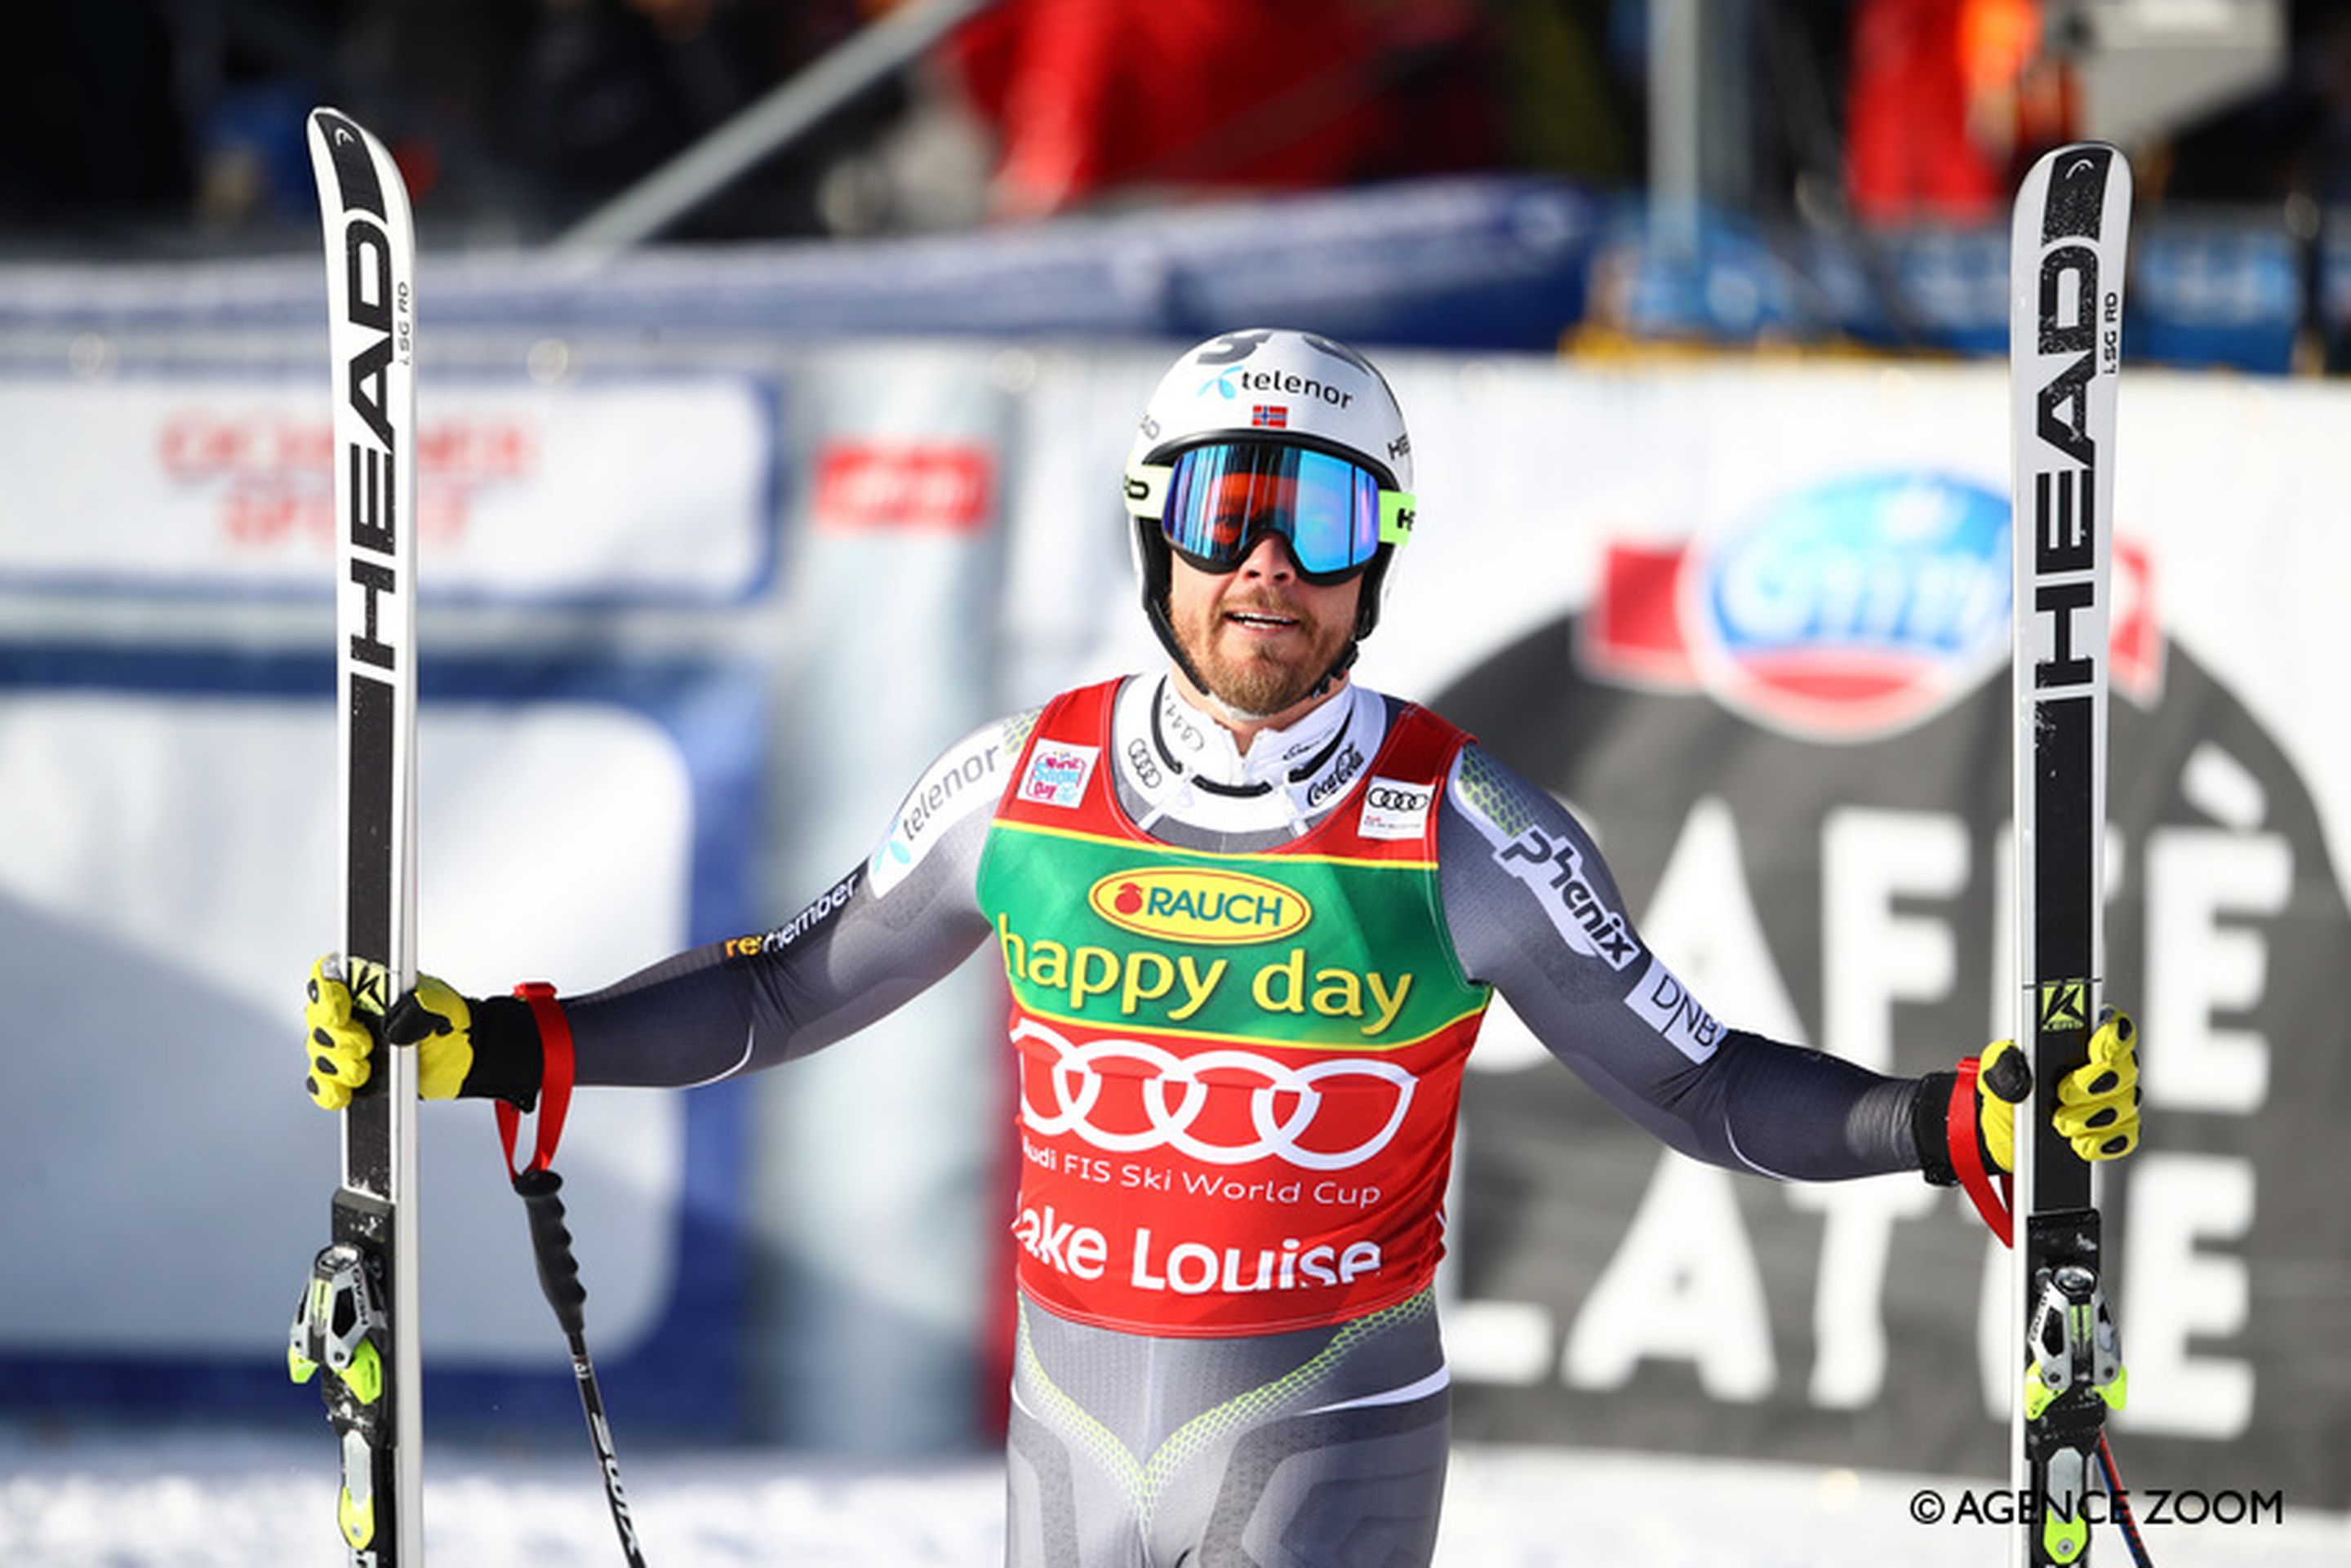 LAKE LOUISE, CANADA - NOVEMBER 25: Kjetil Jansrud of Norway takes 1st place during the Audi FIS Alpine Ski World Cup Men's Super G on November 25, 2018 in Lake Louise Canada. (Photo by Christophe Pallot/Agence Zoom)